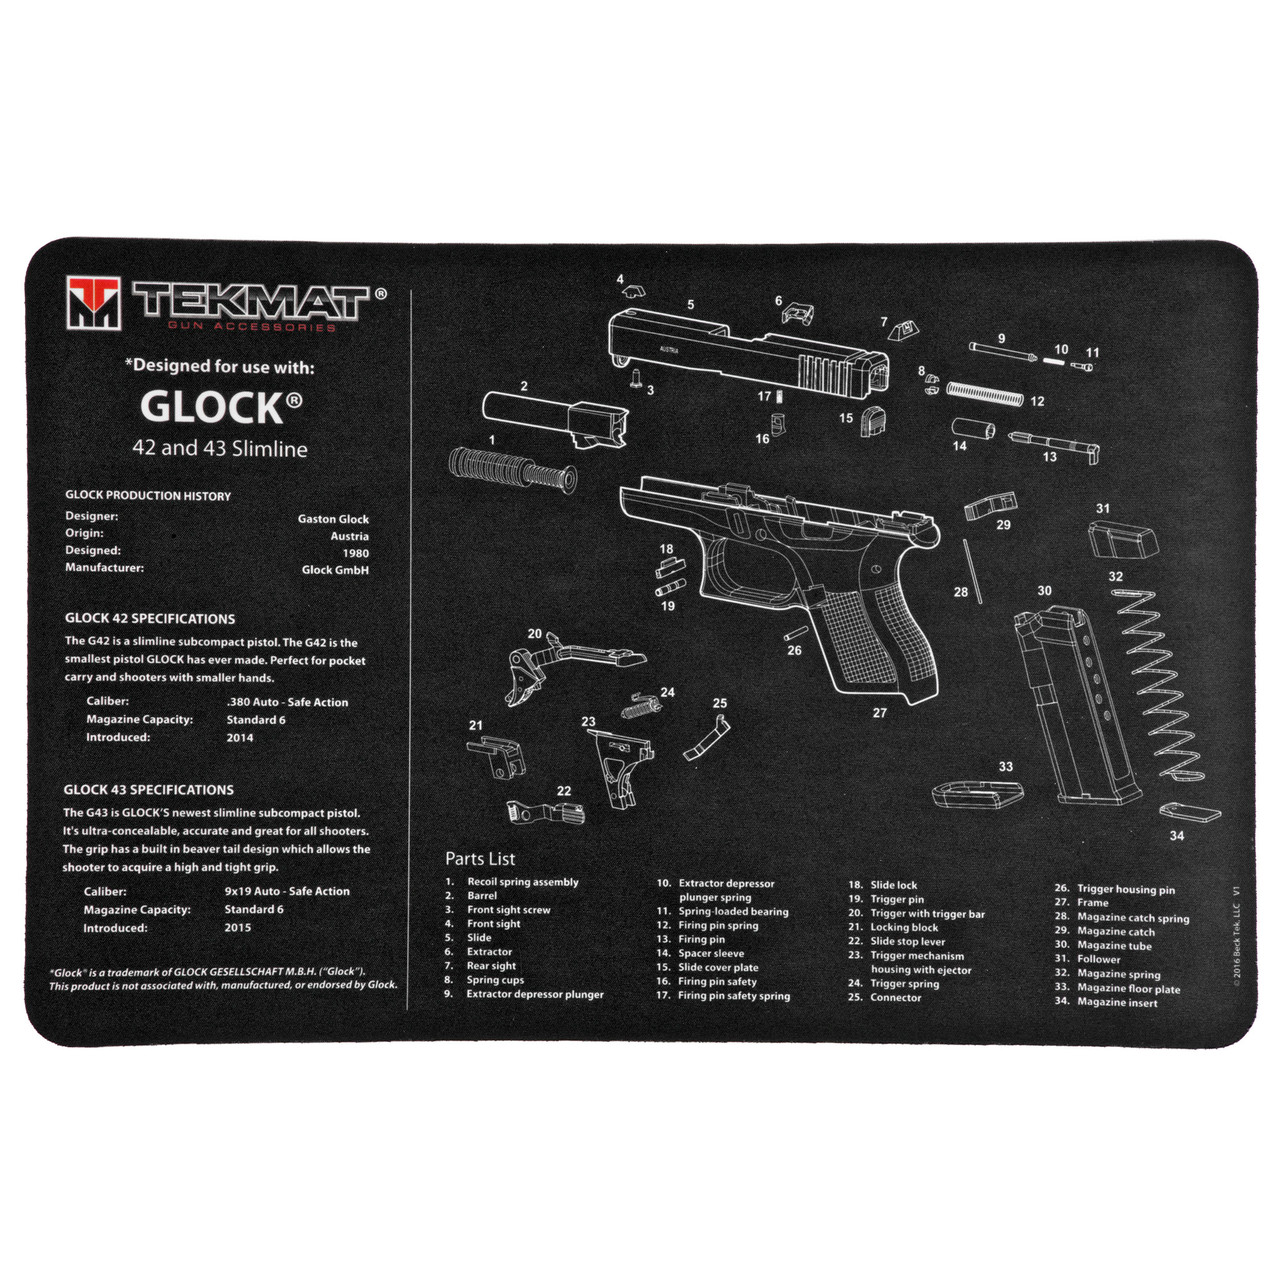 What's the Best Bench Block for Glock?